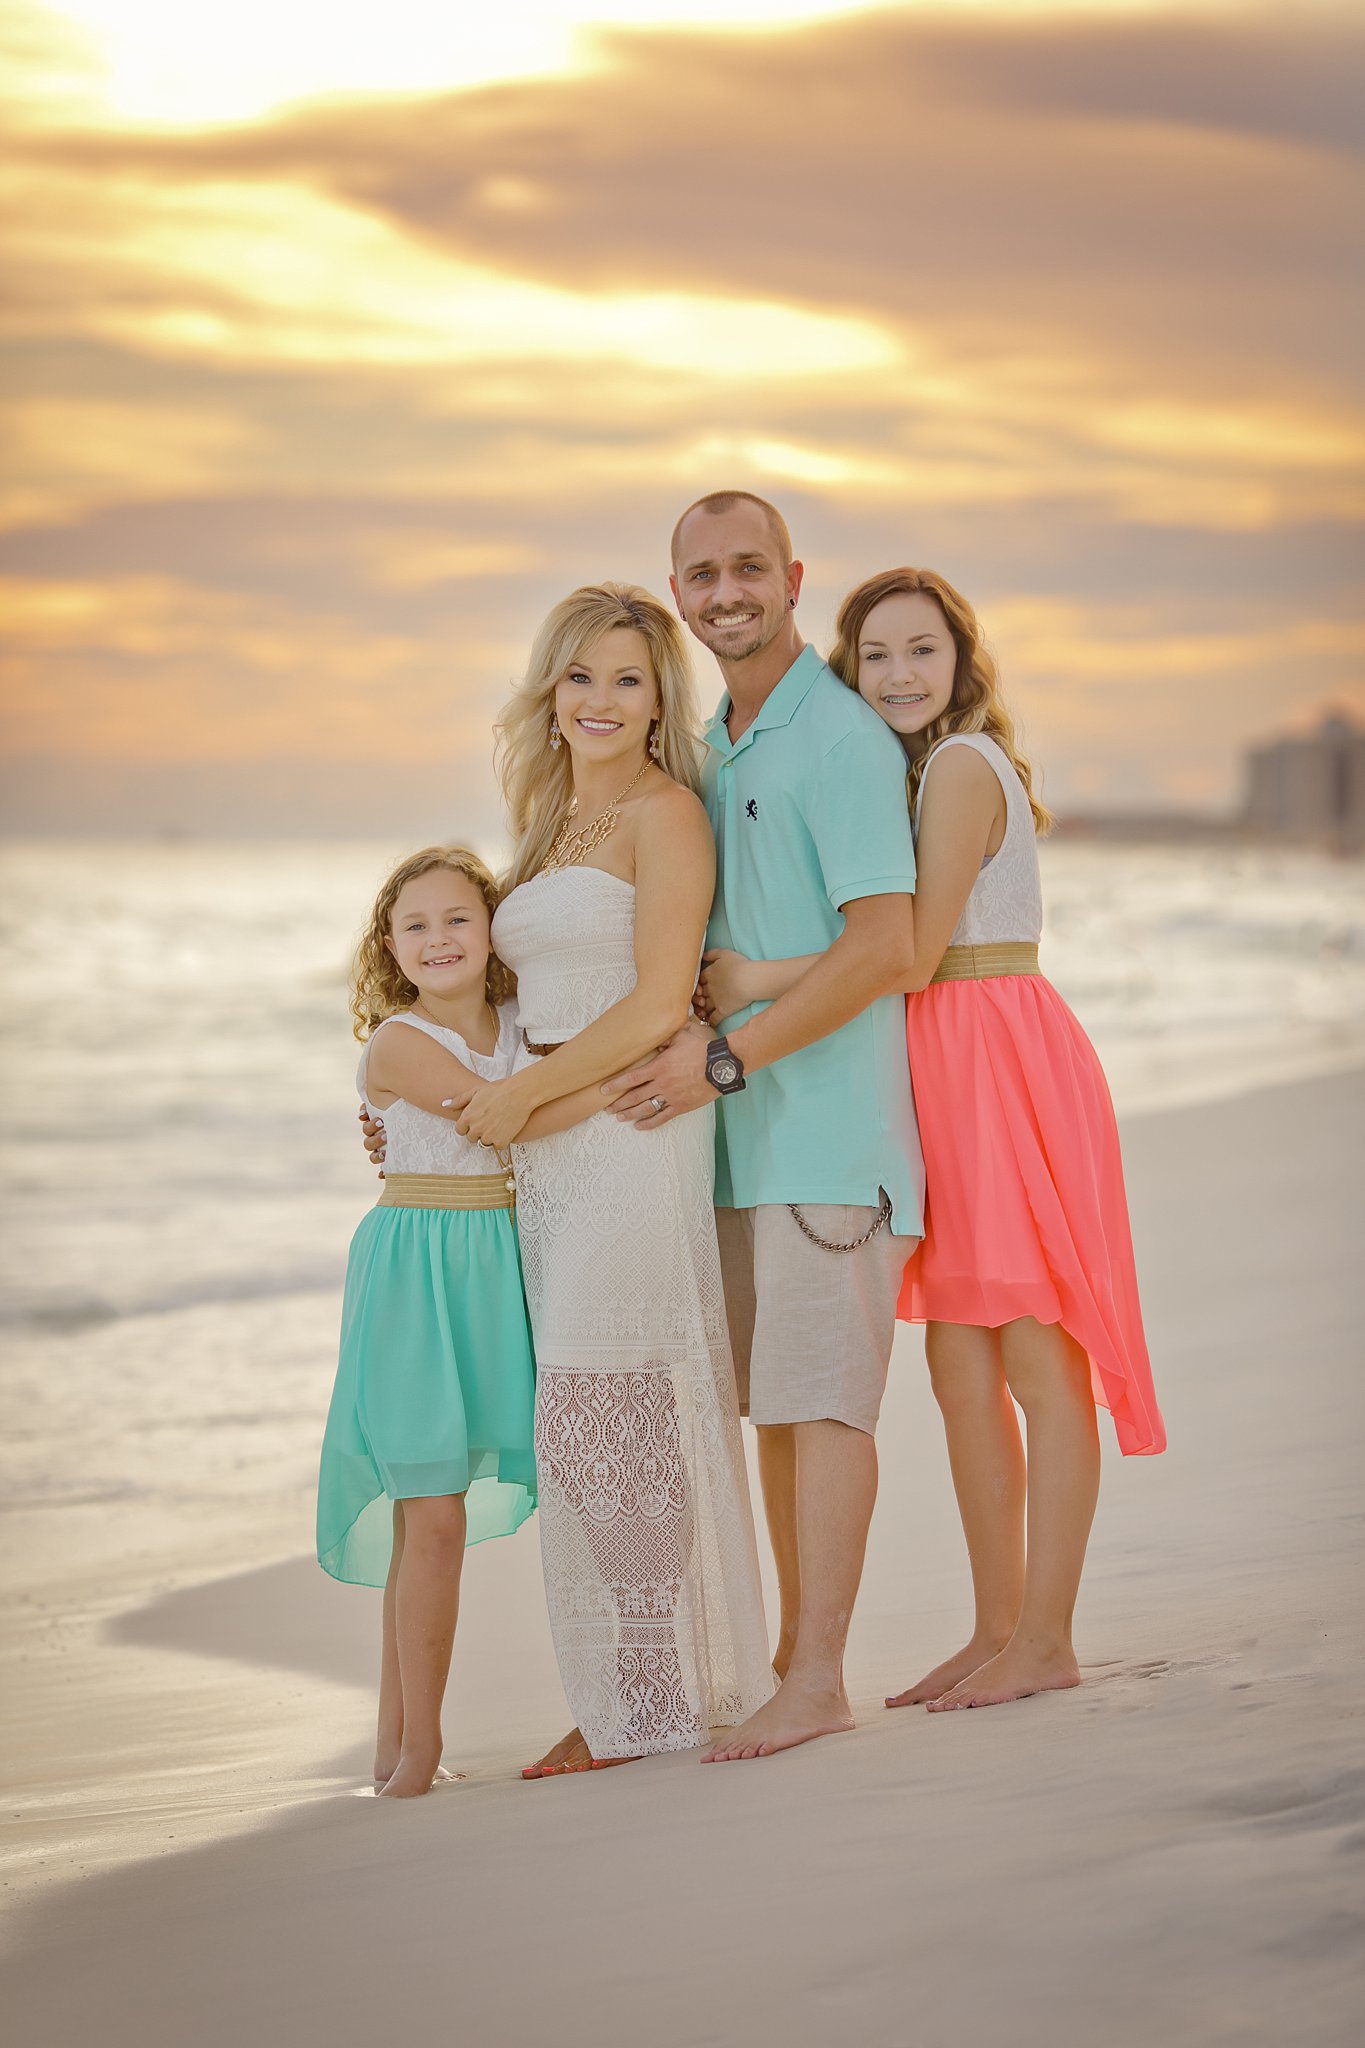 Mint and Salmon... 70+ Best Chosen Family Photo Outfit Ideas in Summer - 64